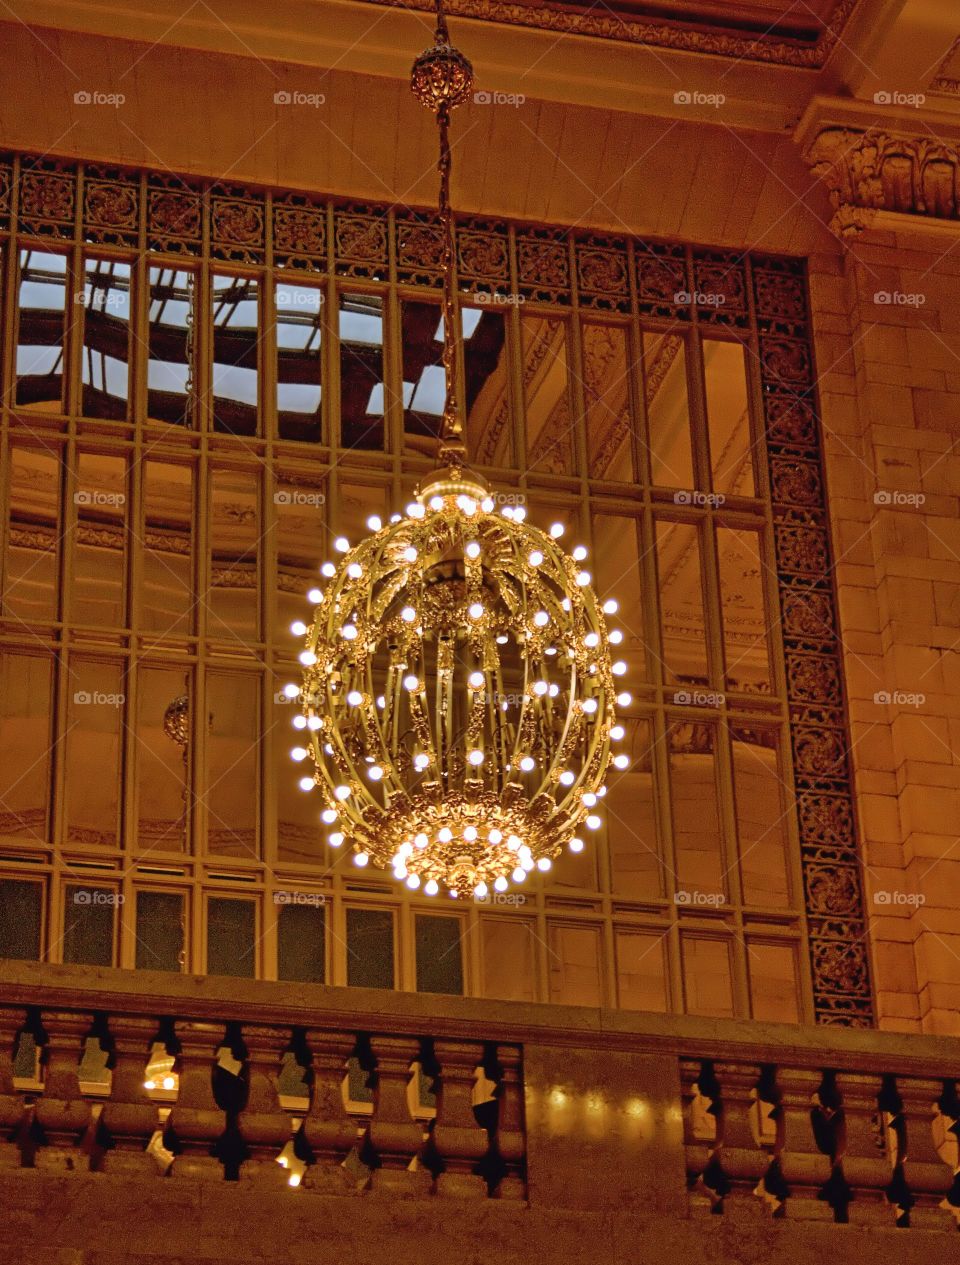 Grand Central Chandelier. Taken during my last trip to NY for Comicon